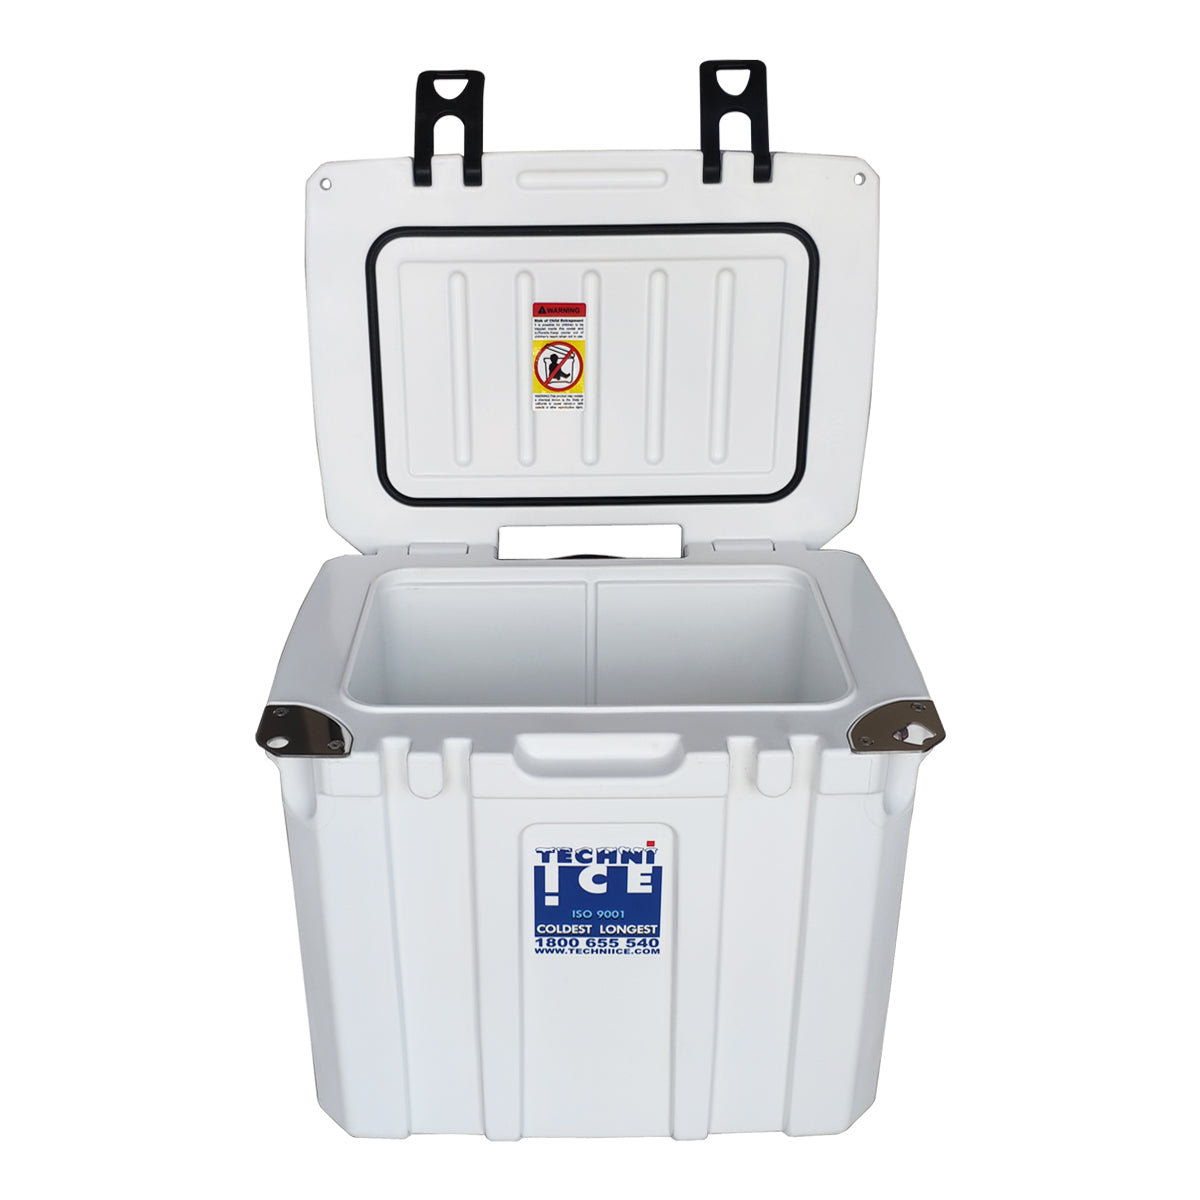 Techni Ice Signature Hybrid Premium Ice Box 35L White with Wheels & Telescopic Travel Handle *PREORDER FOR JUNE DISPATCH *FREE 6 REUSABLE DRY ICE PACKS VALUES $32.95